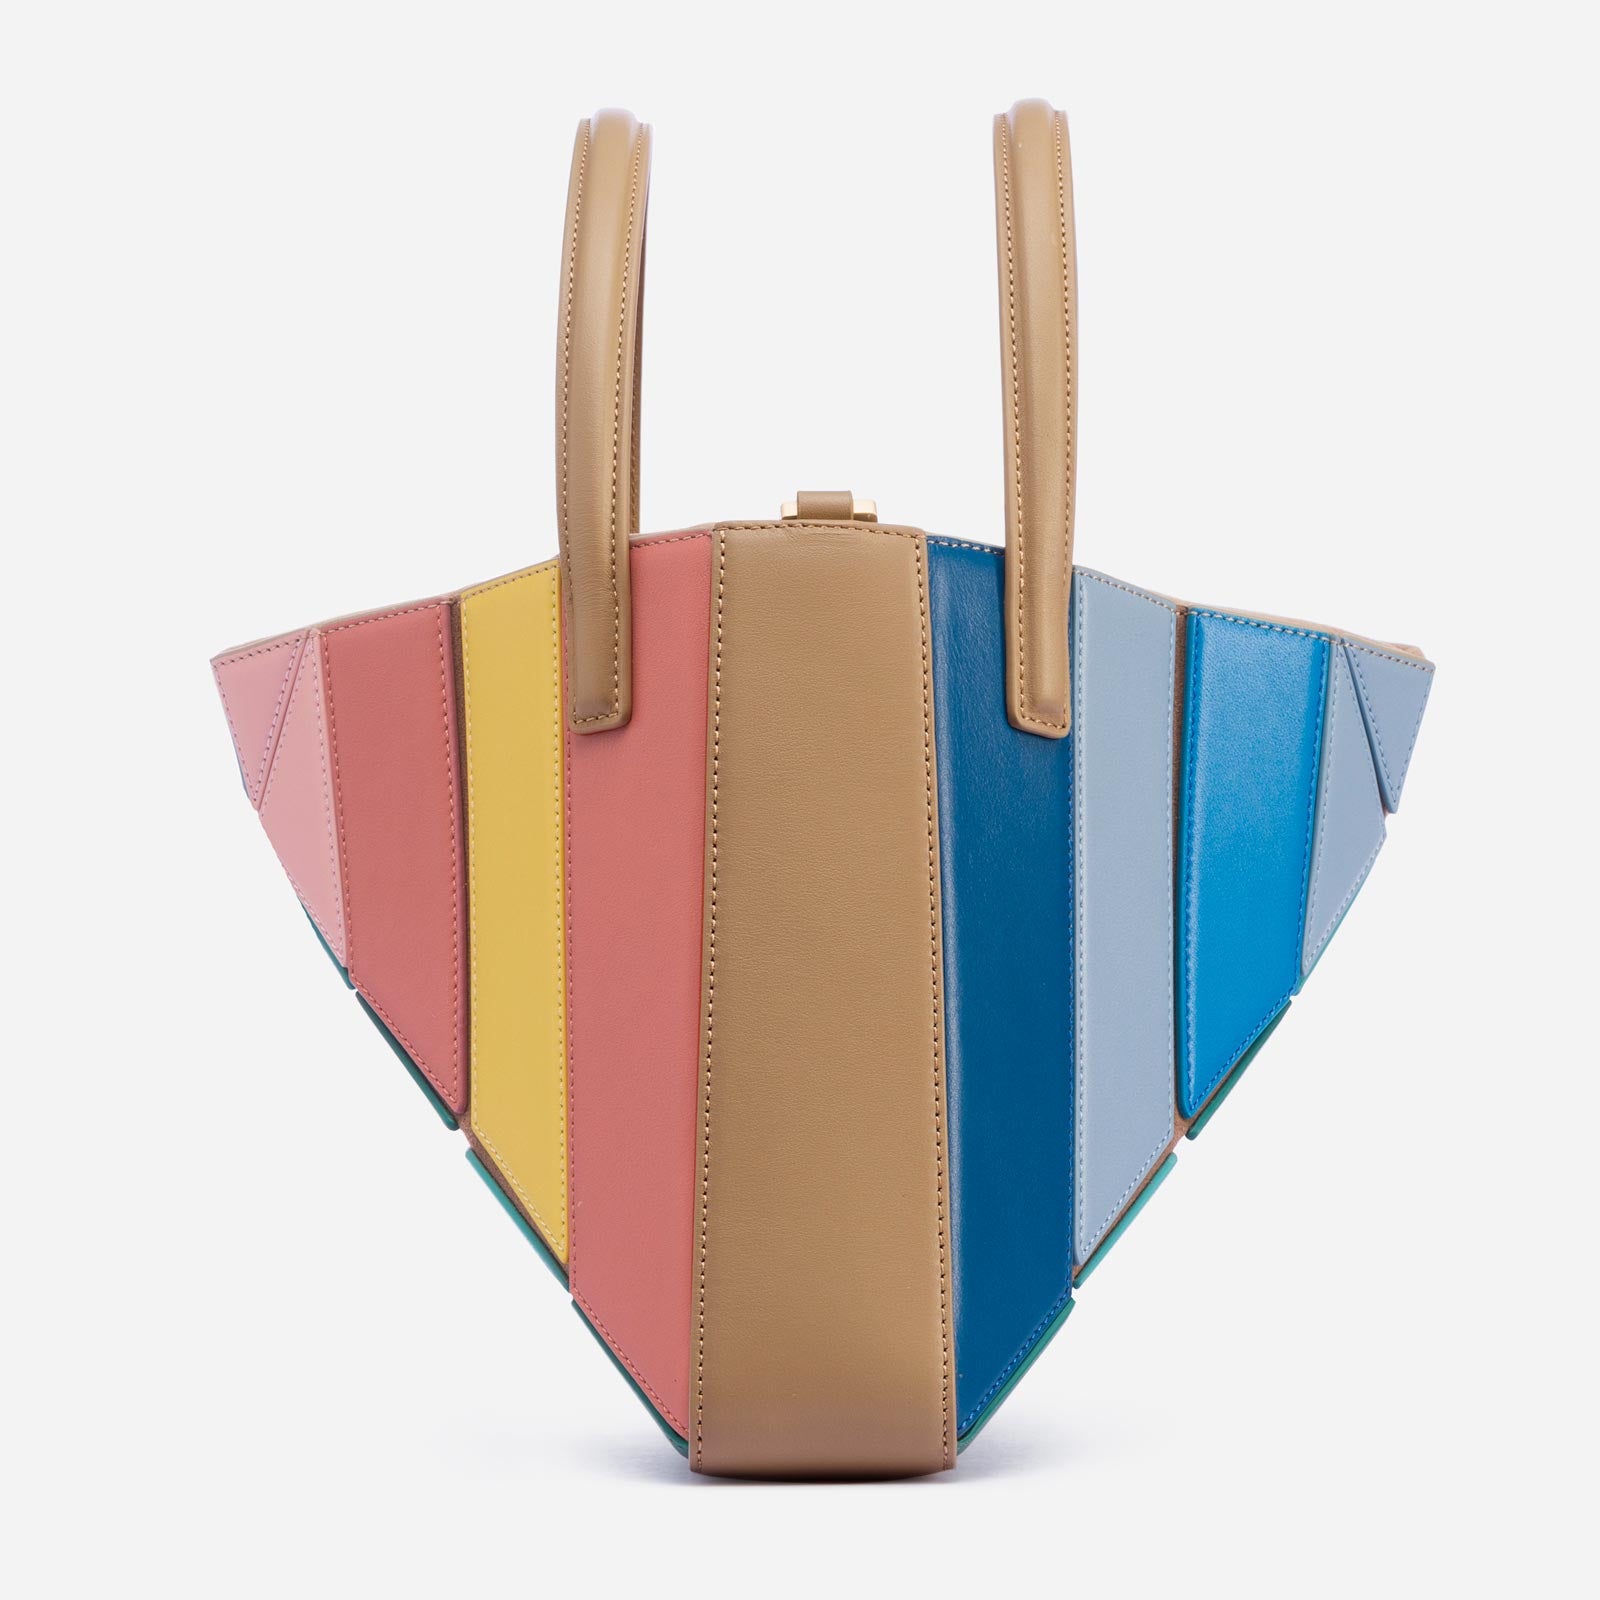 Leather patchwork tote, patchwork bag, giant leather tote, pastel